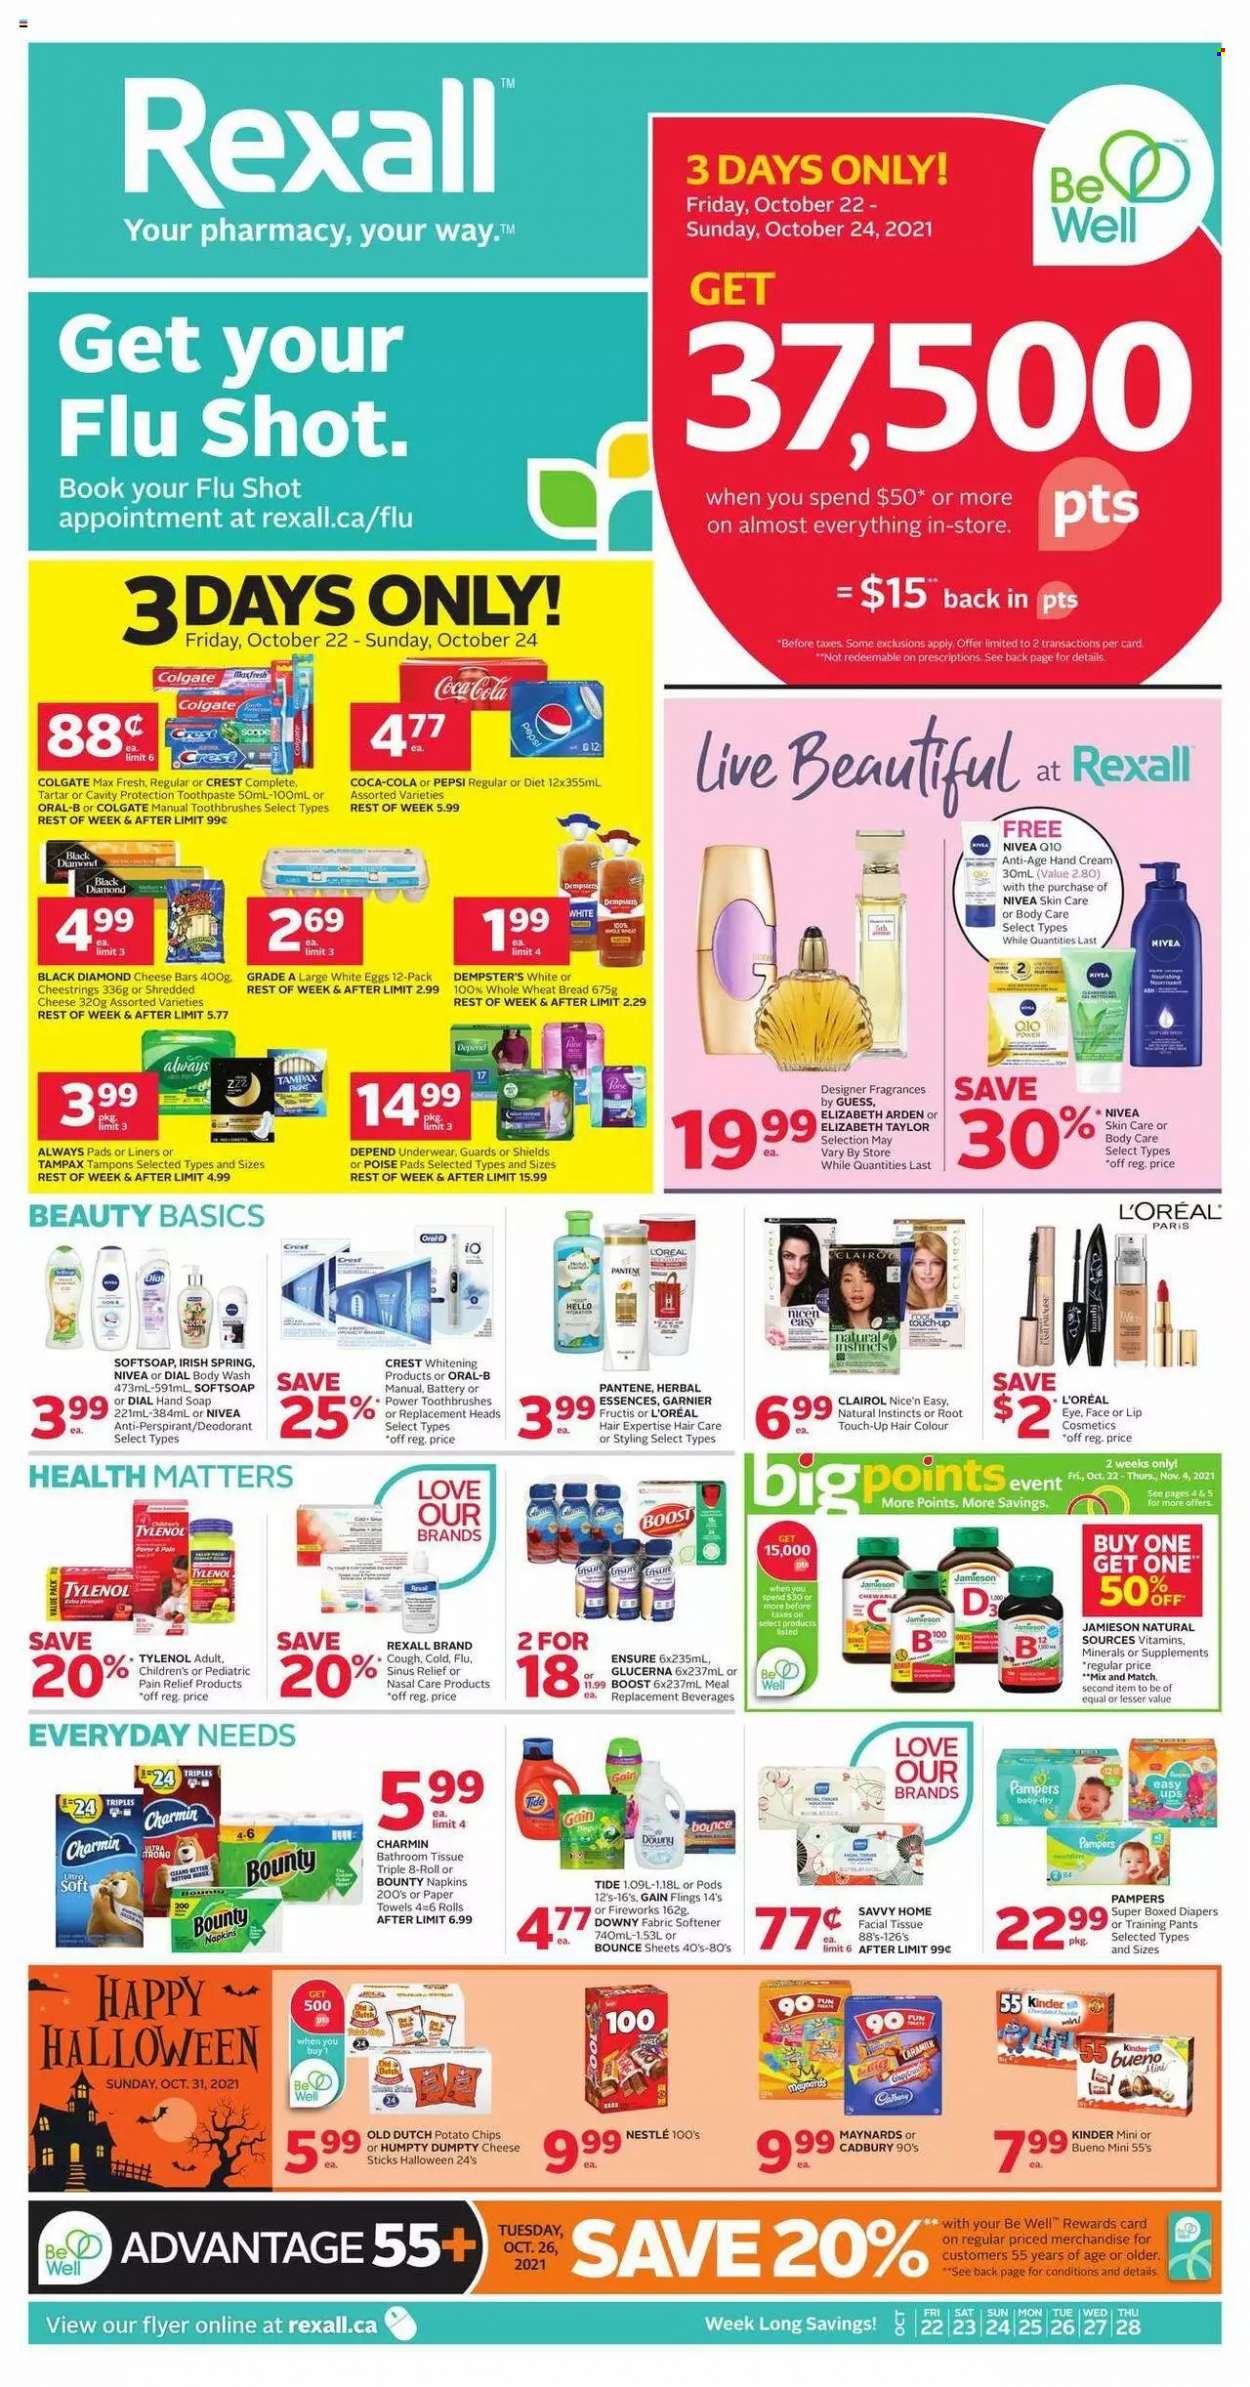 thumbnail - Rexall Flyer - October 22, 2021 - October 28, 2021 - Sales products - Bounty, Kinder Bueno, Cadbury, potato chips, Coca-Cola, Pepsi, Boost, Jameson, pants, nappies, napkins, baby pants, bath tissue, kitchen towels, paper towels, Charmin, Gain, Tide, fabric softener, Bounce, Downy Laundry, body wash, Softsoap, hand soap, Dial, soap, toothpaste, Crest, Always pads, sanitary pads, tampons, L’Oréal, Root Touch-Up, Clairol, hair color, hand cream, anti-perspirant, Guess, pain relief, Tylenol, Glucerna, Nestlé, Elizabeth Arden, Colgate, Garnier, Tampax, Pampers, Pantene, Nivea, Oral-B, chips, deodorant. Page 1.